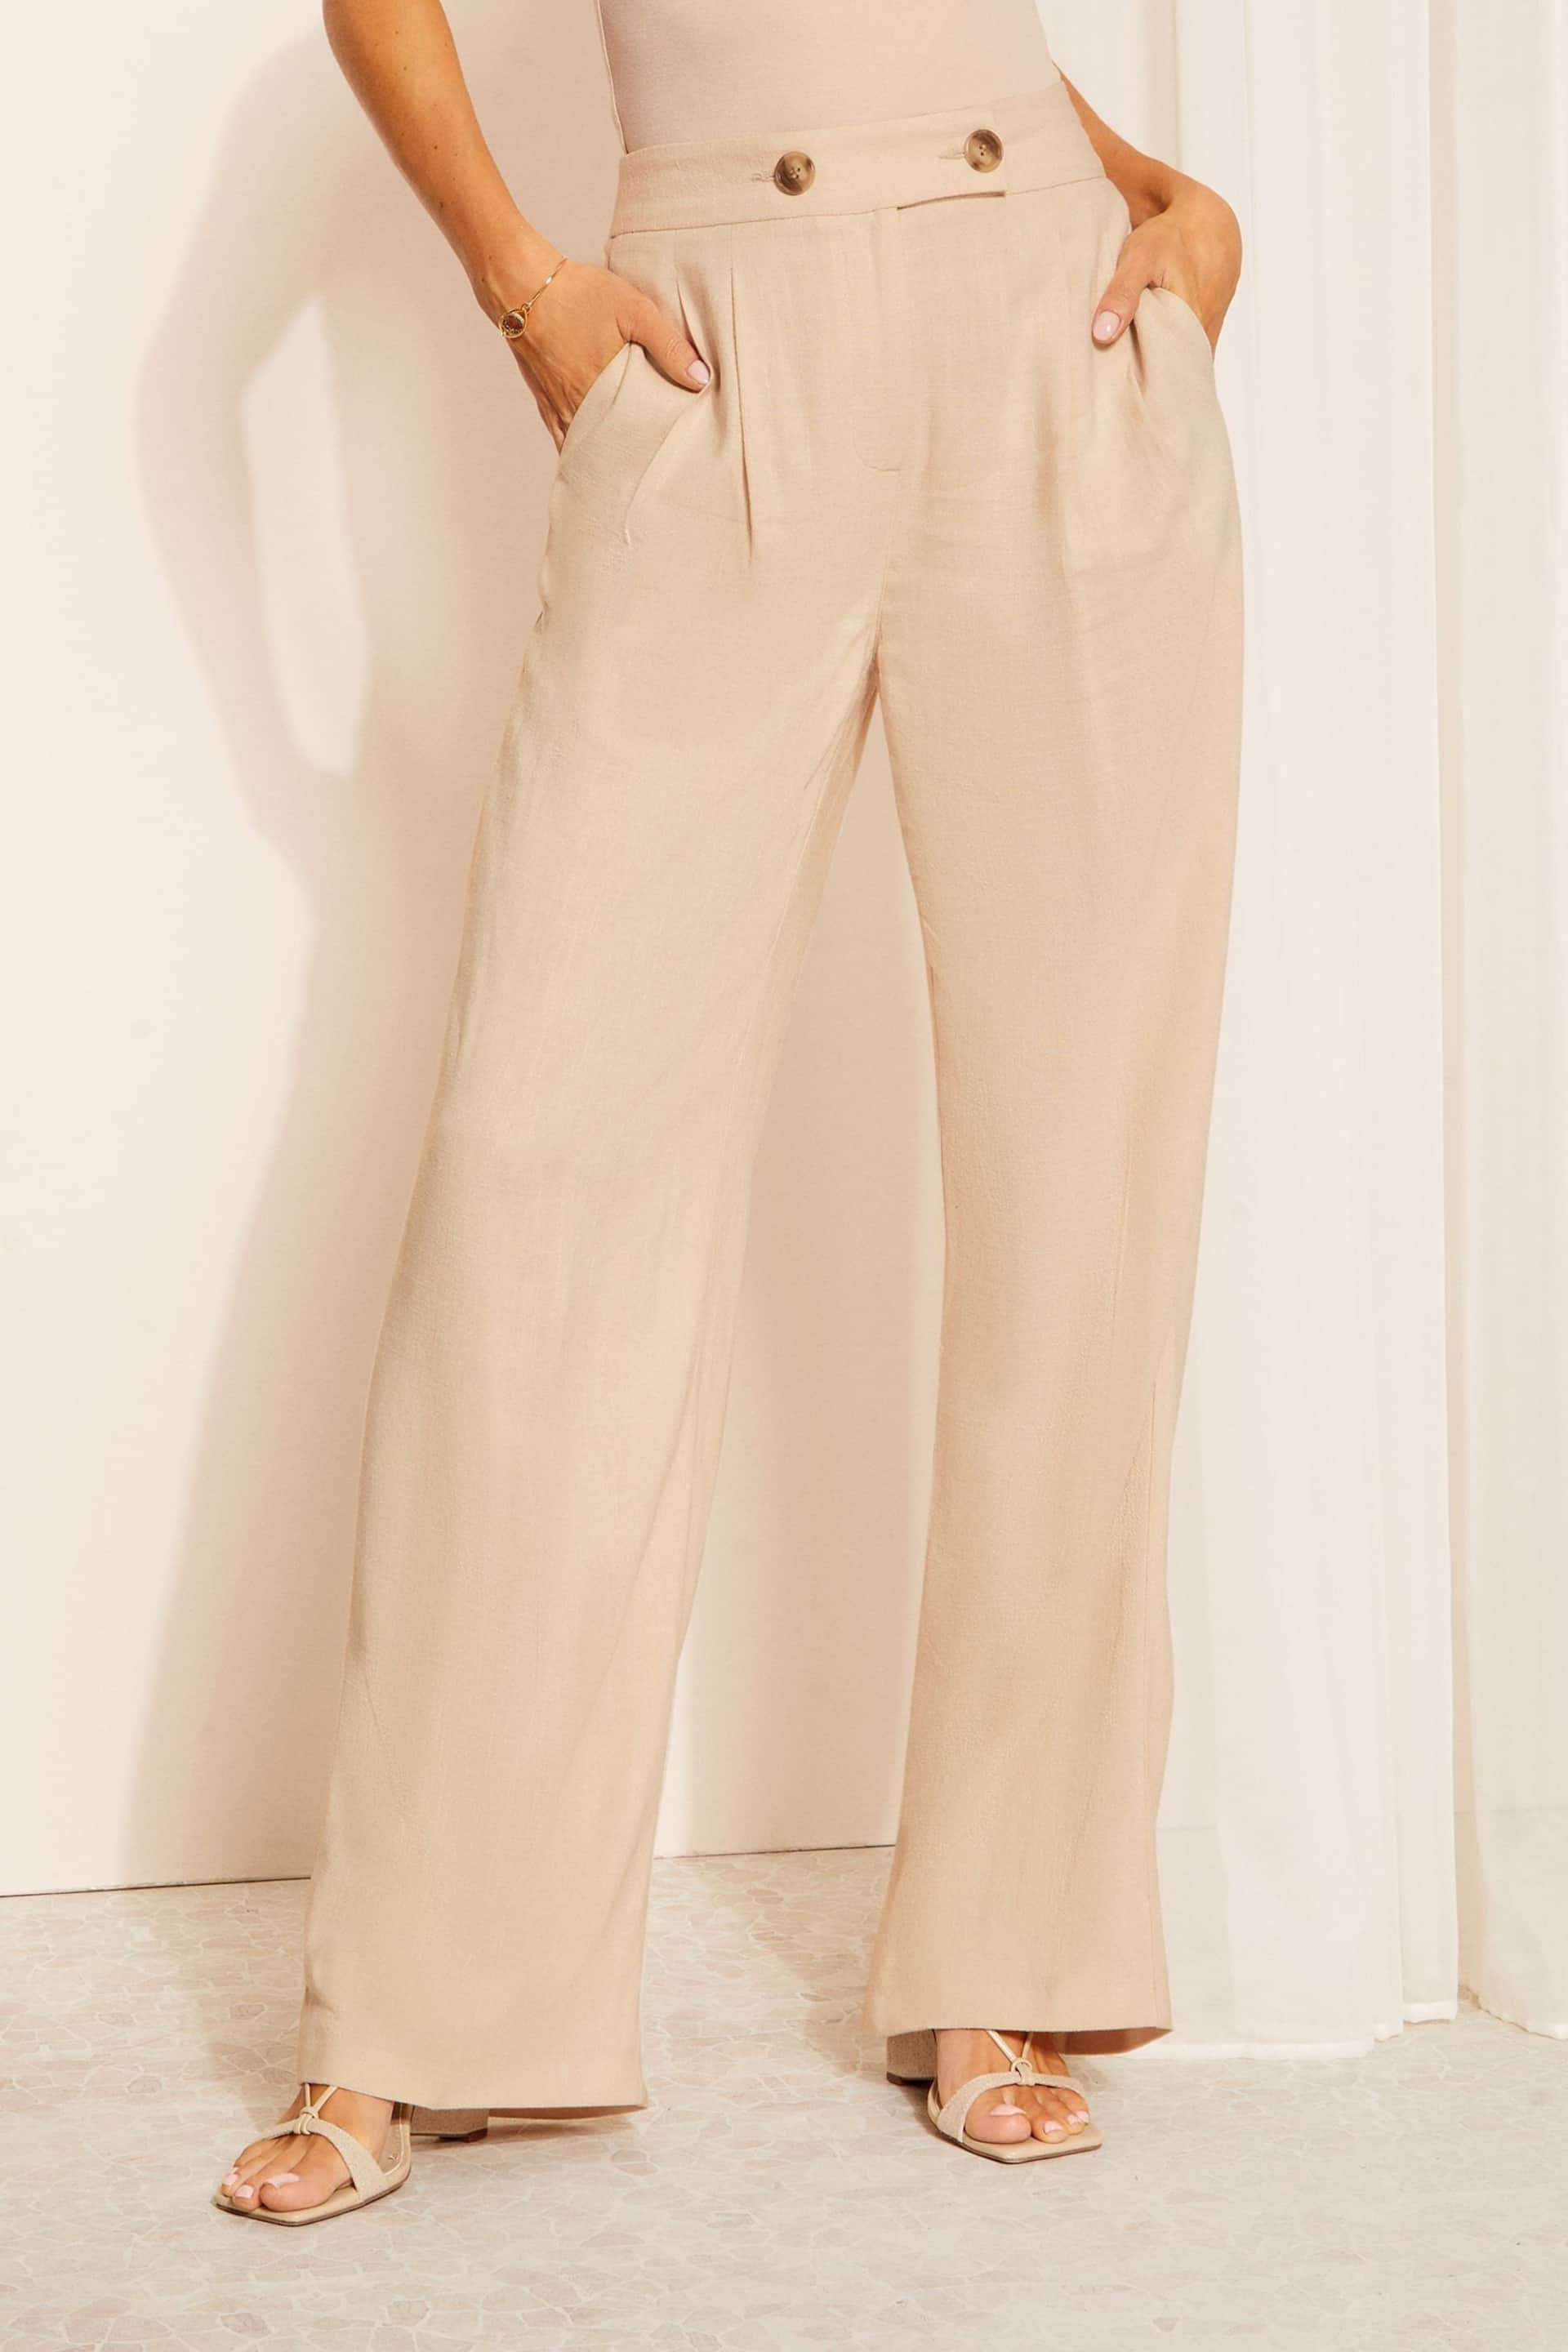 Friends Like These Cream Wide Leg Trousers with Linen - Image 1 of 4